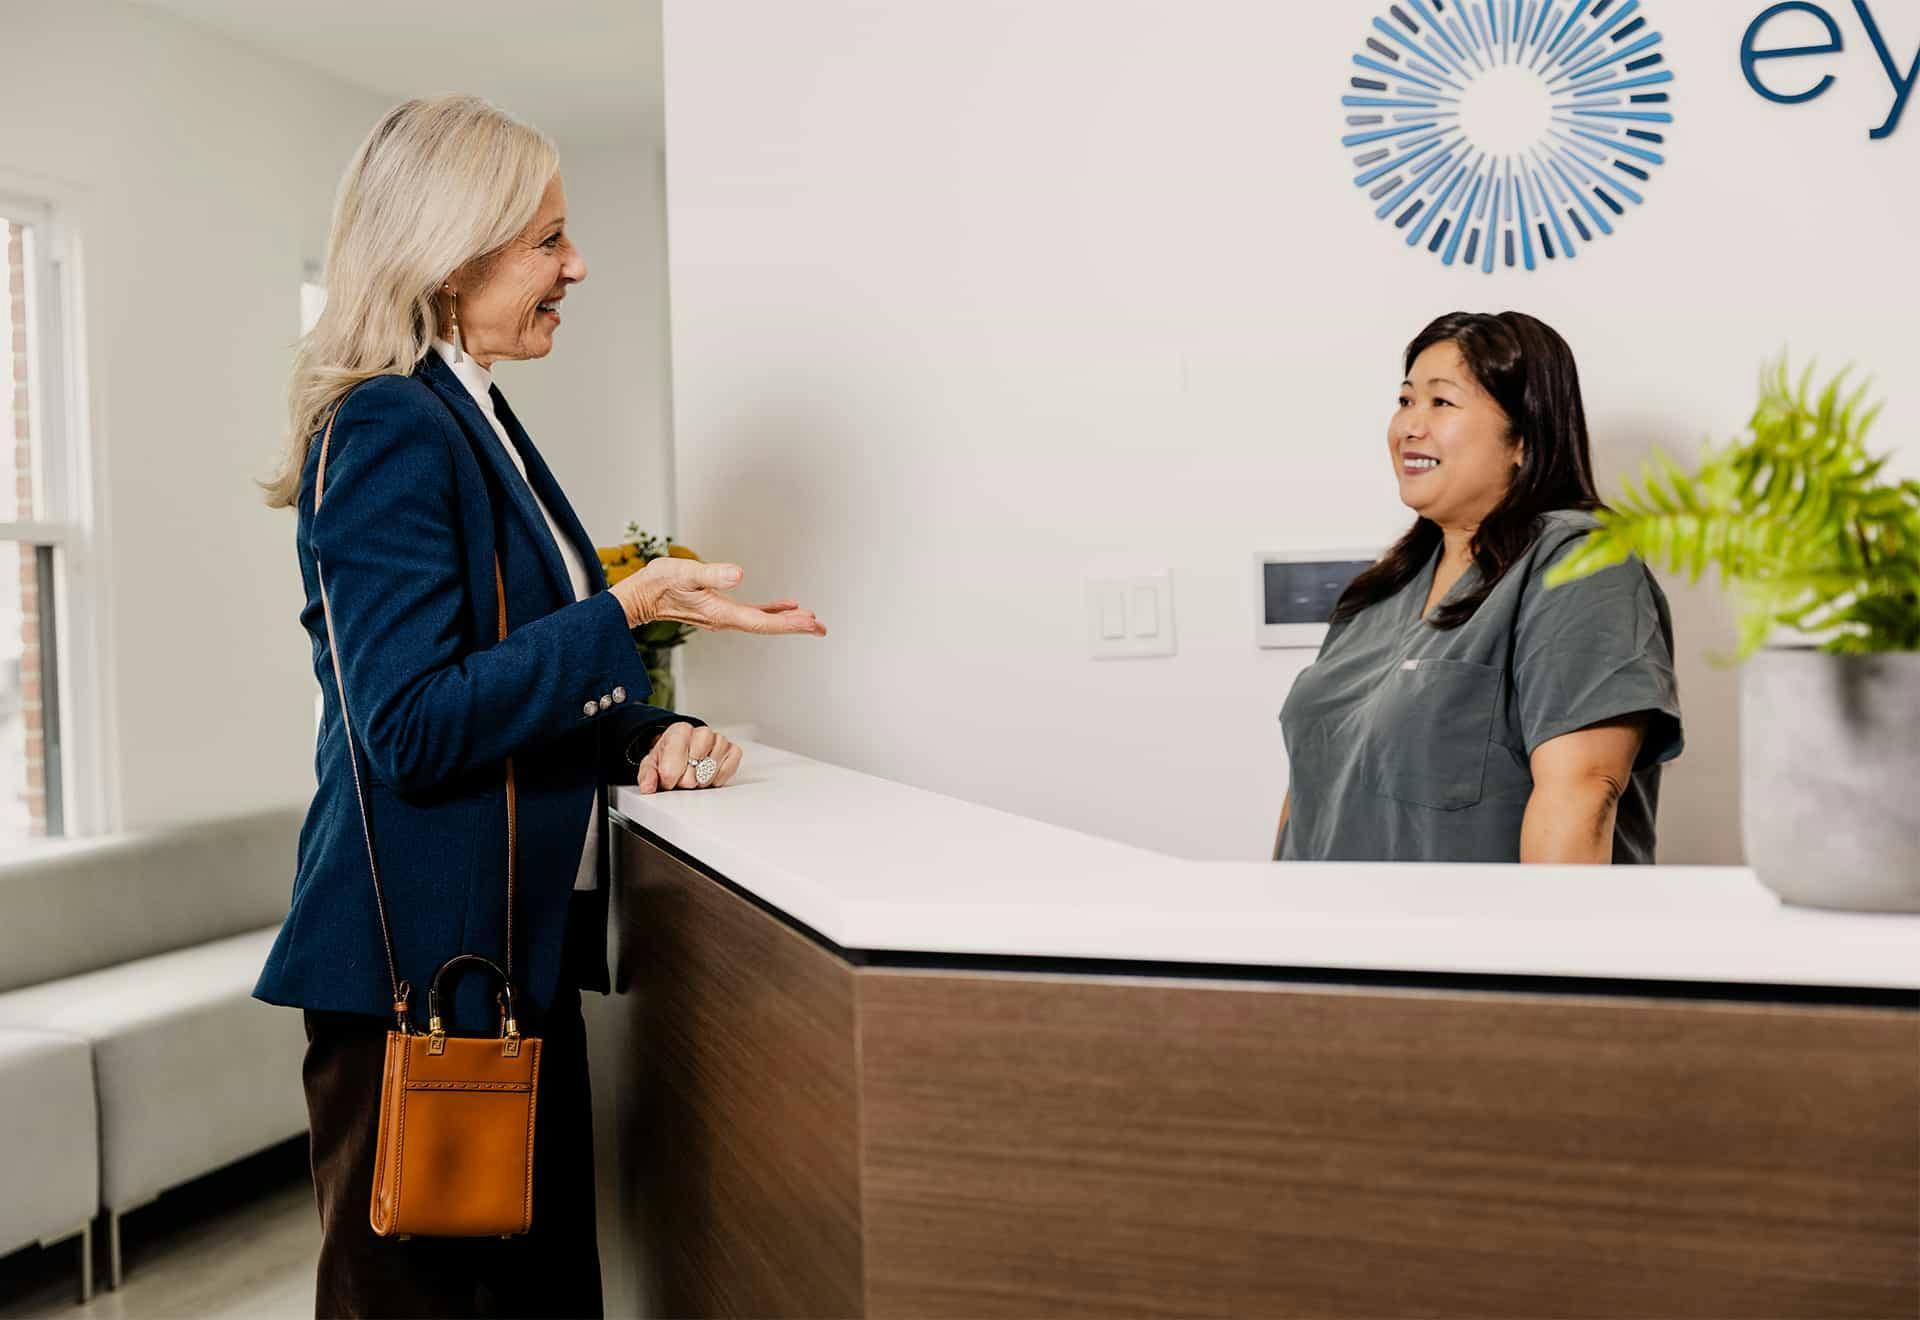 Patient at front desk talking to reception